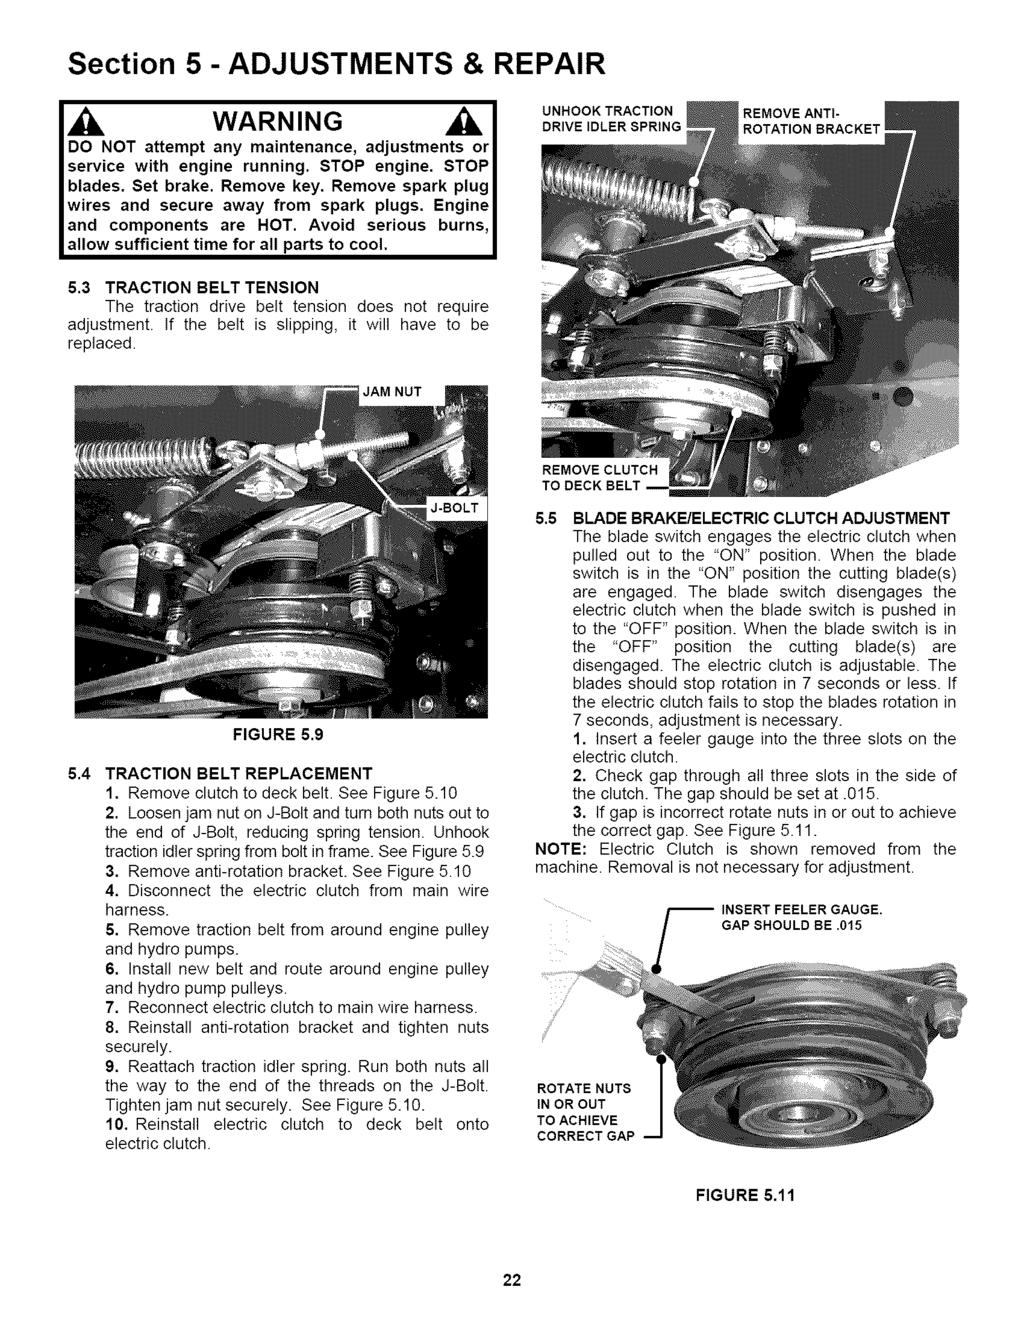 Section 5 - ADJUSTMENTS & REPAIR DO NOT attempt any maintenance, adjustments or service with engine running. STOP engine. STOP blades. Set brake. Remove key.